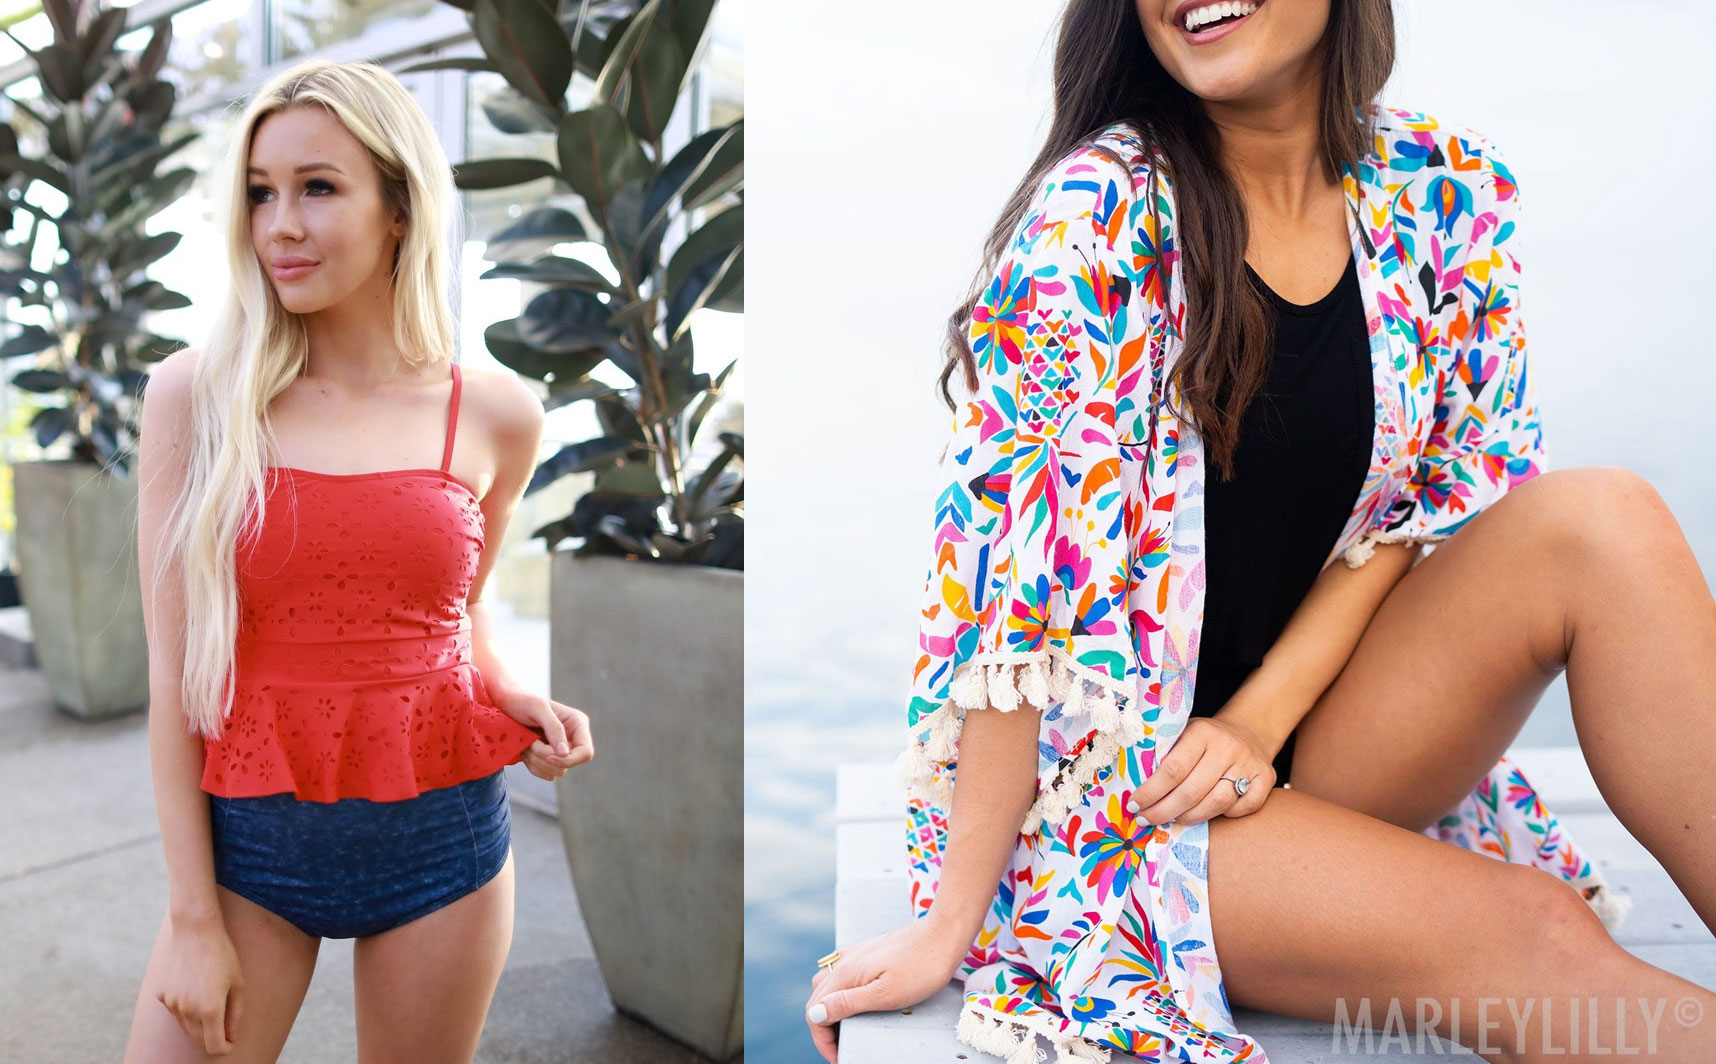 Enter for your chance to win a Rad Swim Liberty Eyelet Peplum Tankini swimsuit and Marleylilly Coverup.